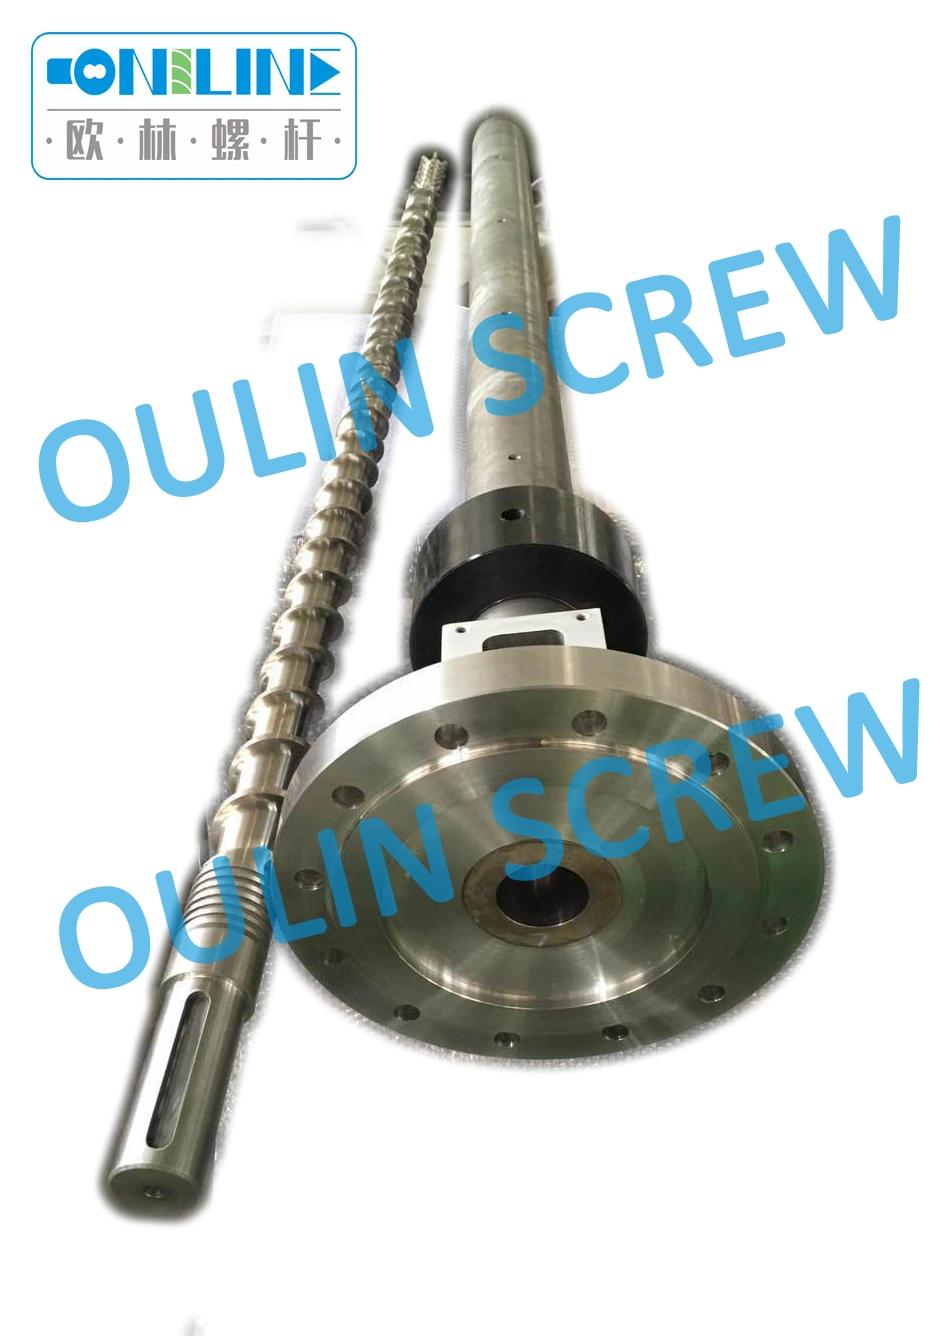 Design Screw and Barrel for High Speed Pipe Extrusion